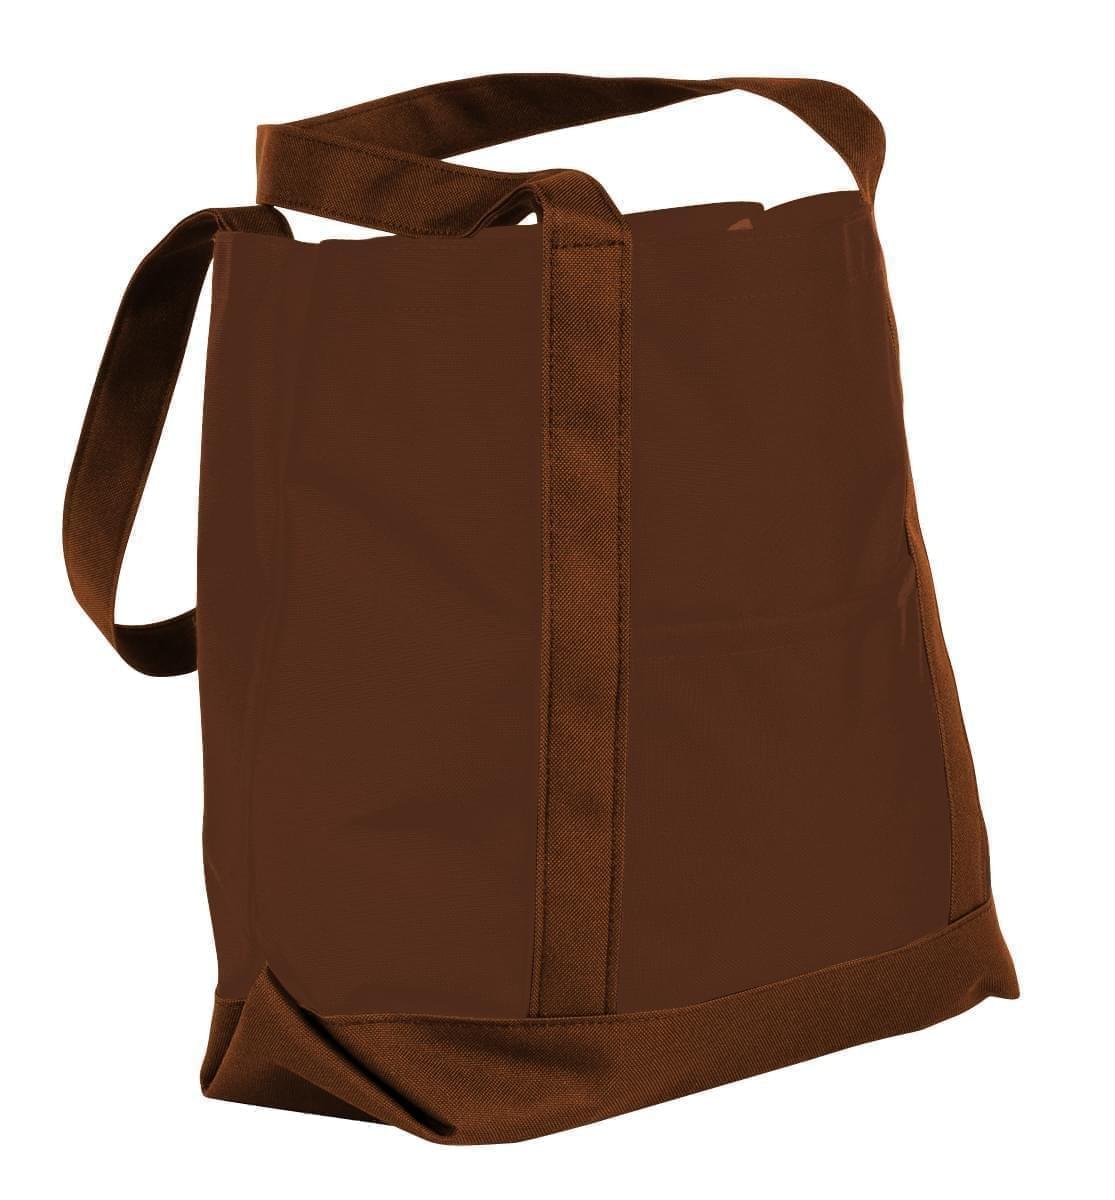 USA Made Nylon Poly Boat Tote Bags, Brown-Brown, XAACL1UAPD